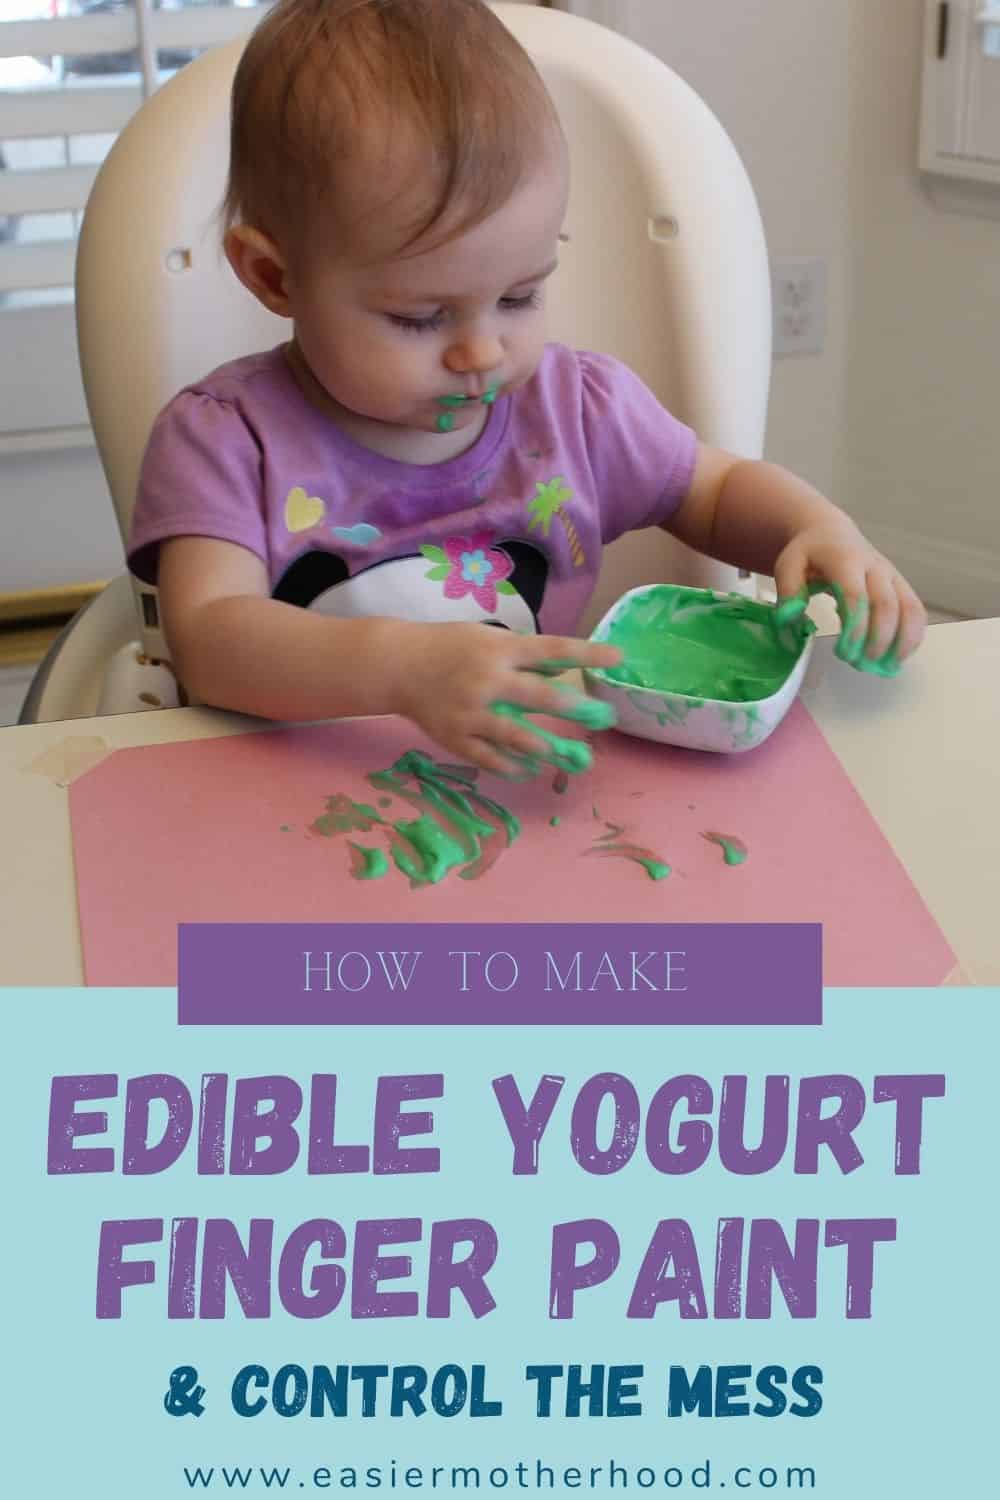 Pin with child playing with edible yogurt finger paint